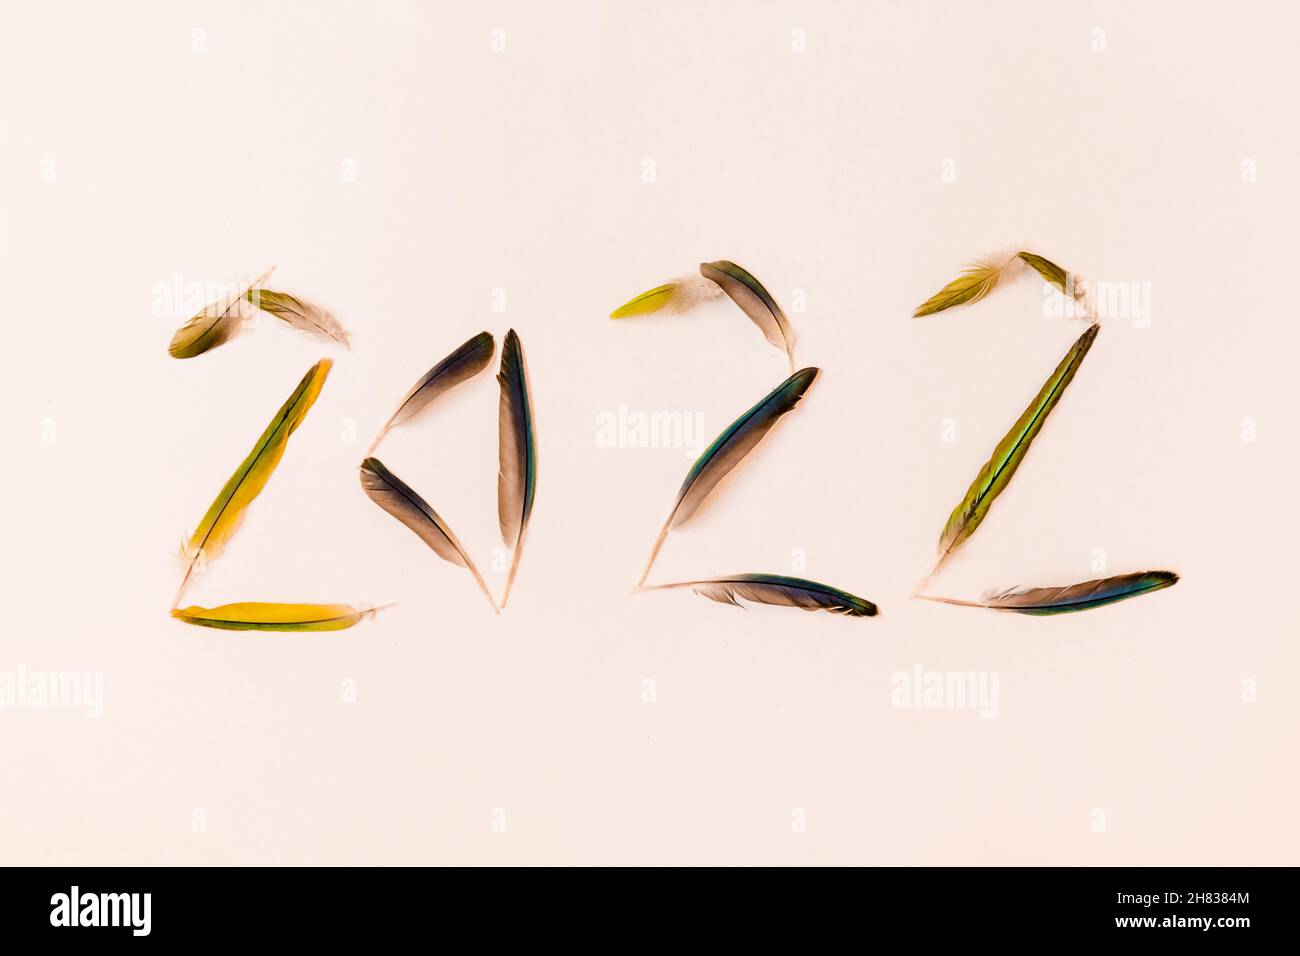 Numeral 2022 is made of green bird feathers on a white background. Stock Photo